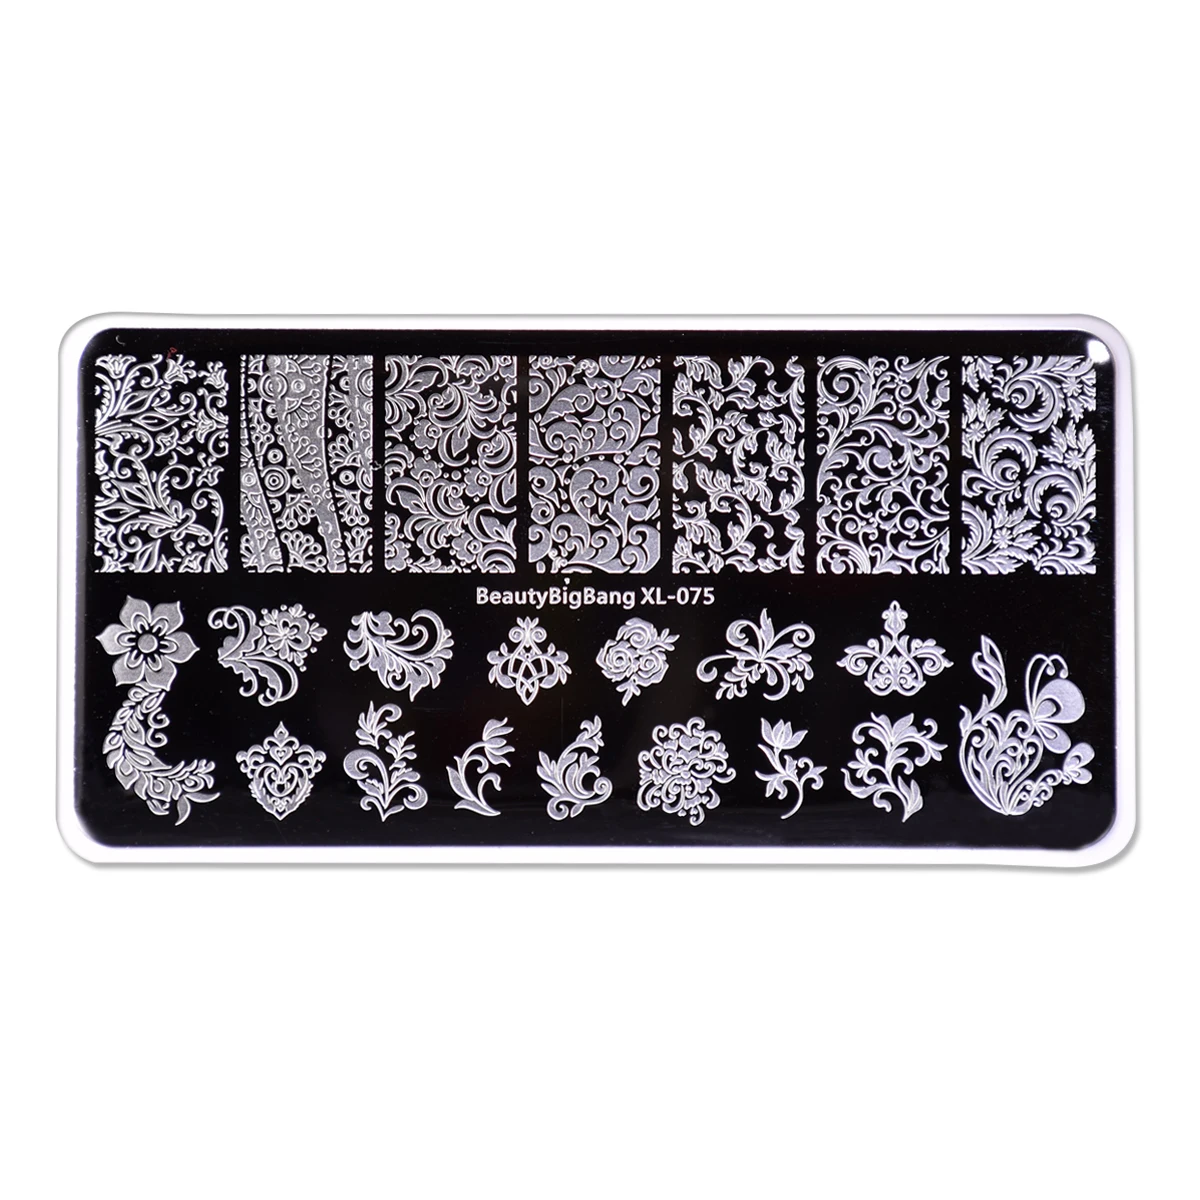 BEAUTYBIGBANG Nail Stamping Plates Flower Young Girl Series Nail Template Stamp Image Manicure Plate DIY Nail Designs XL-073